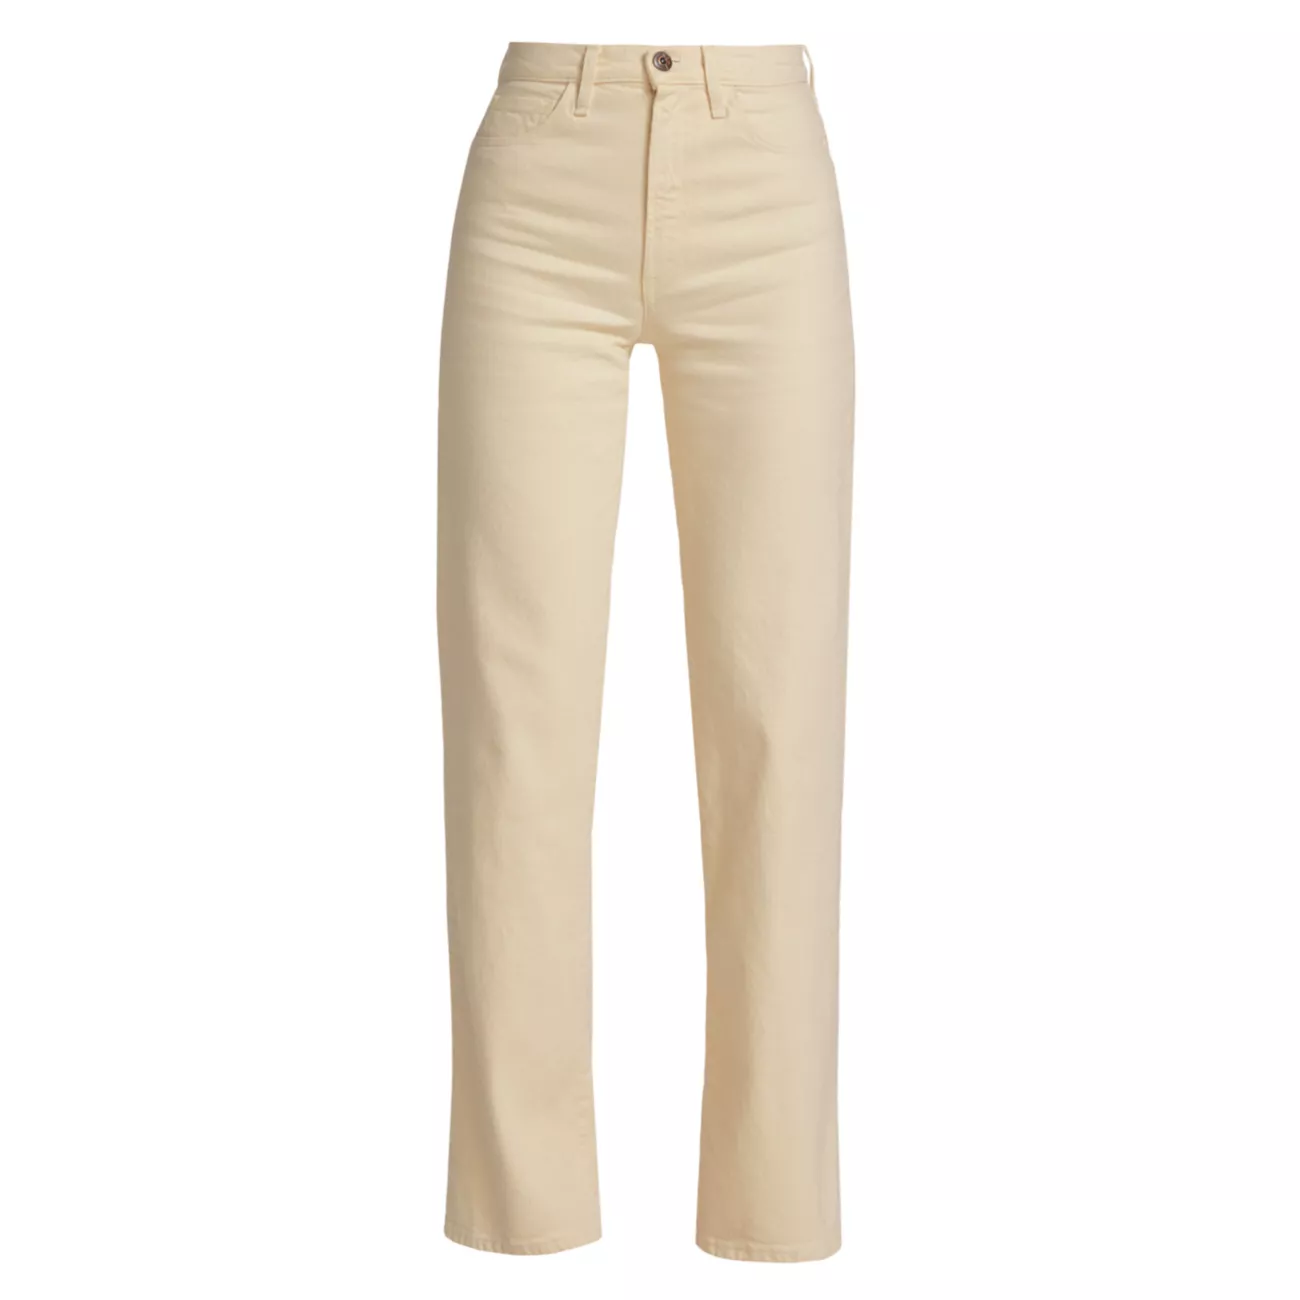 Kate High-Rise Straight-Leg Jeans 3x1 NYC